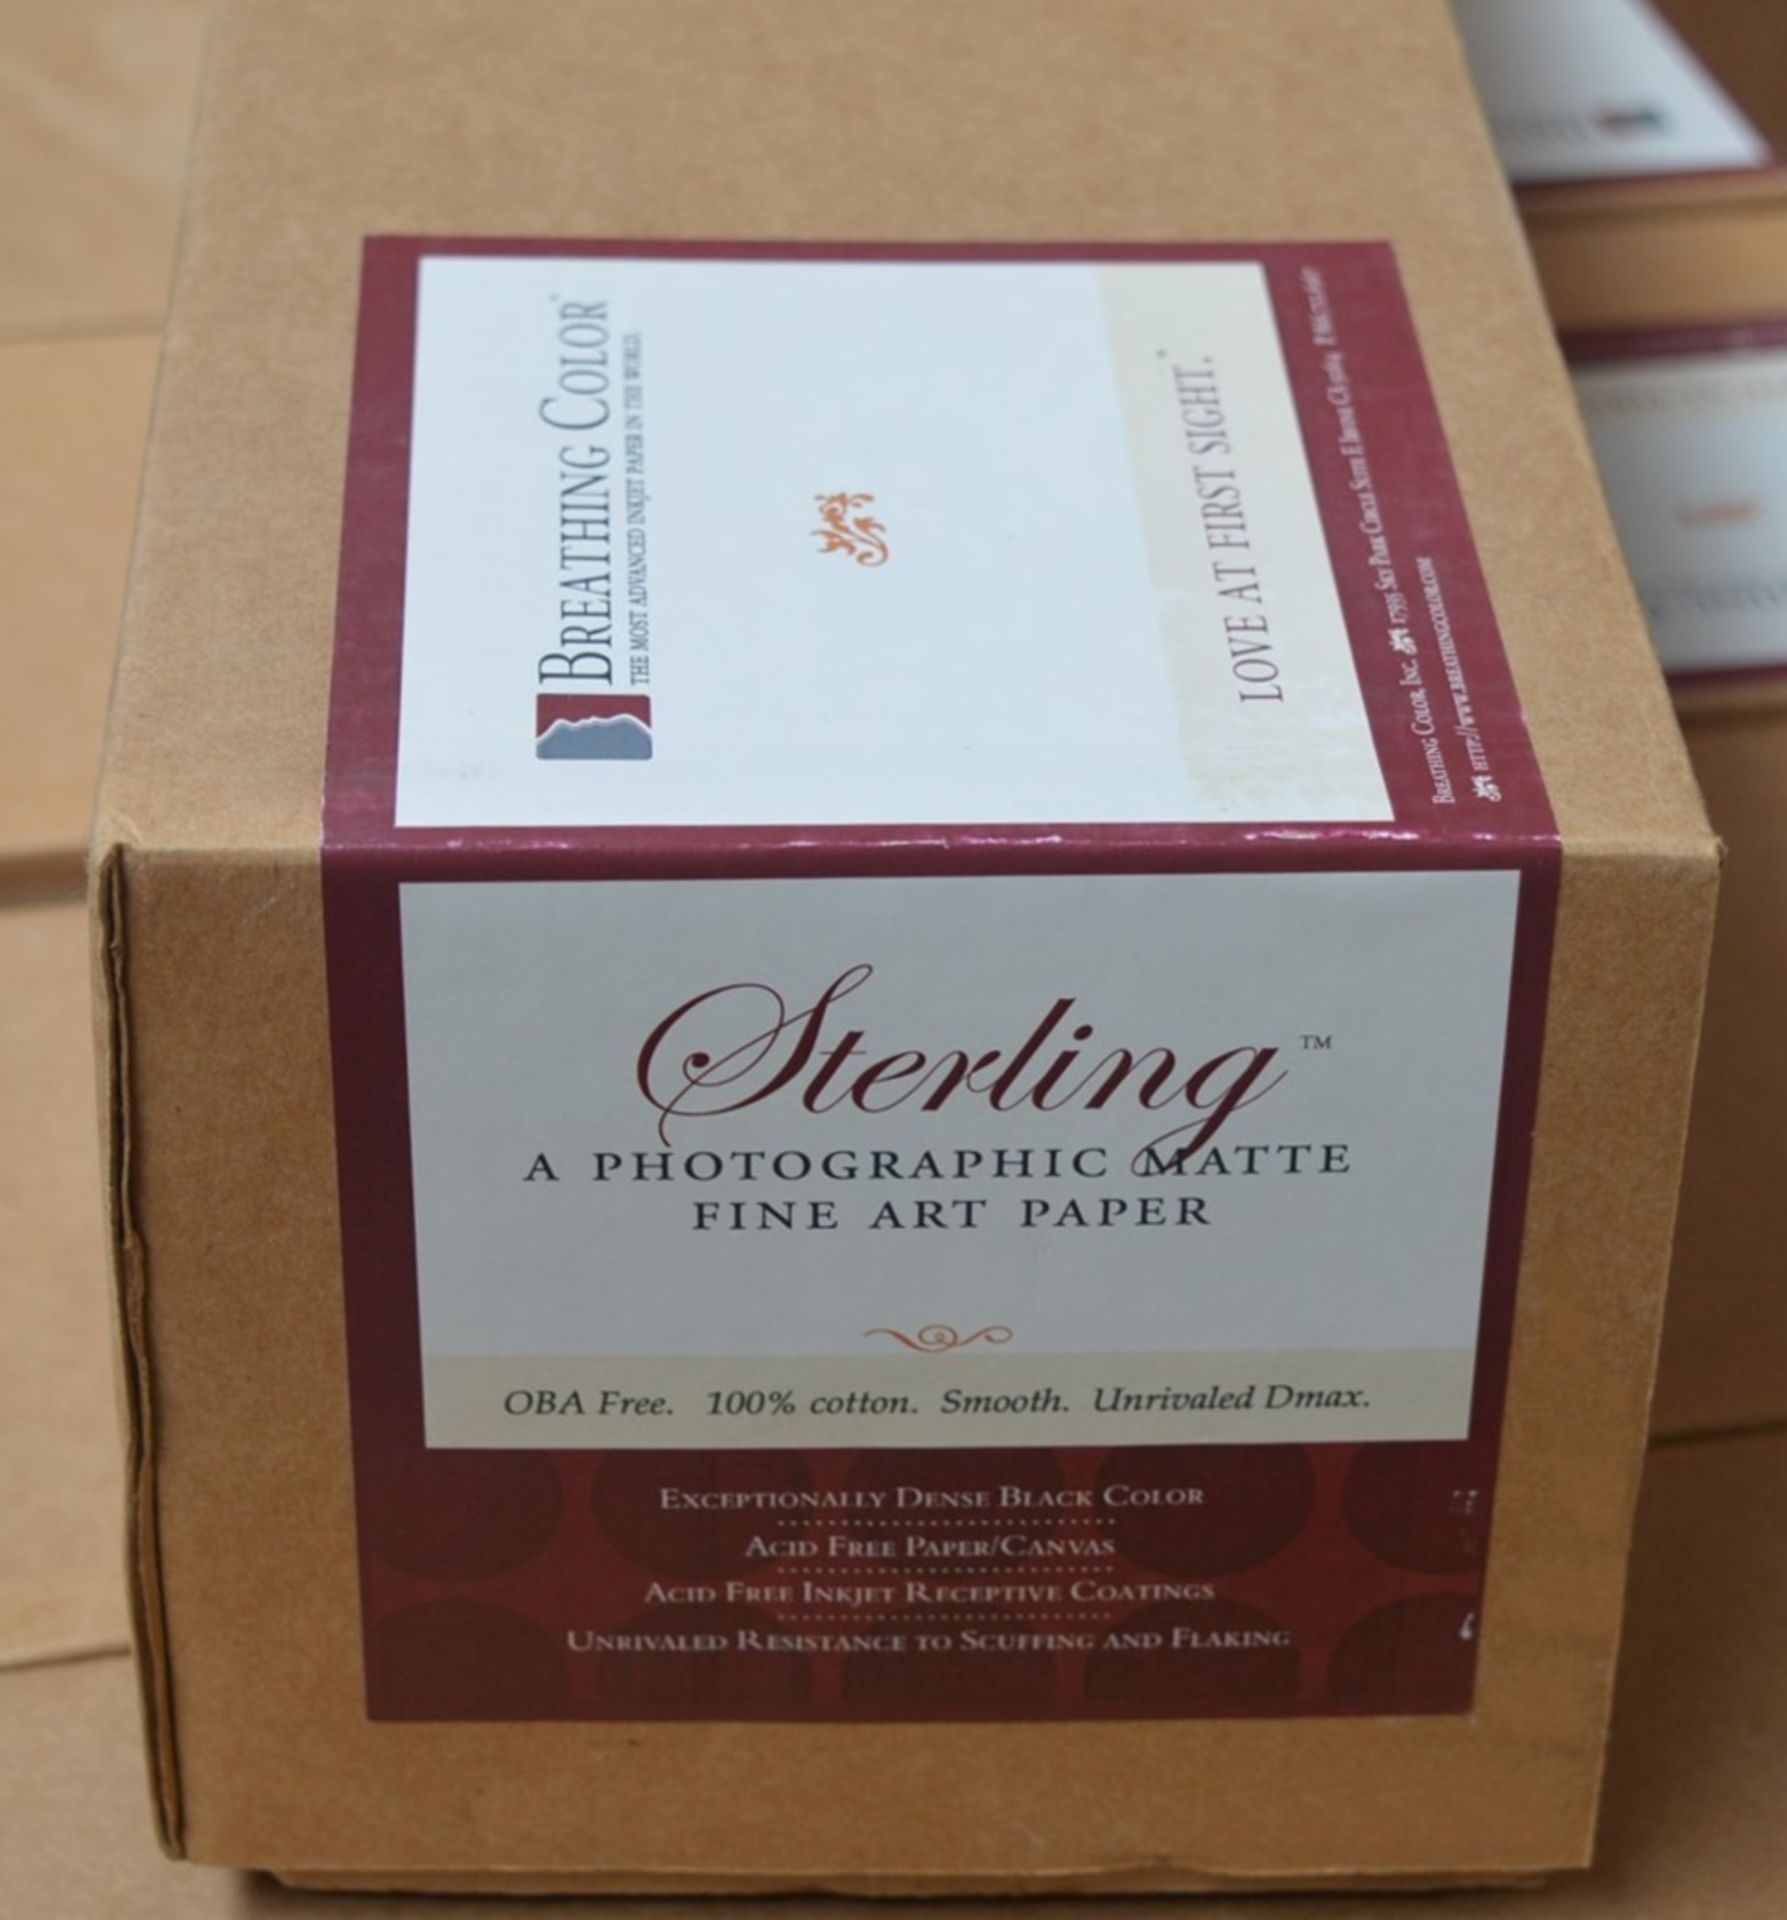 1 x Roll of Breathing Colour STERLING Photographic Matte Fine Art Paper - Size 24" x 40' - - Image 2 of 4